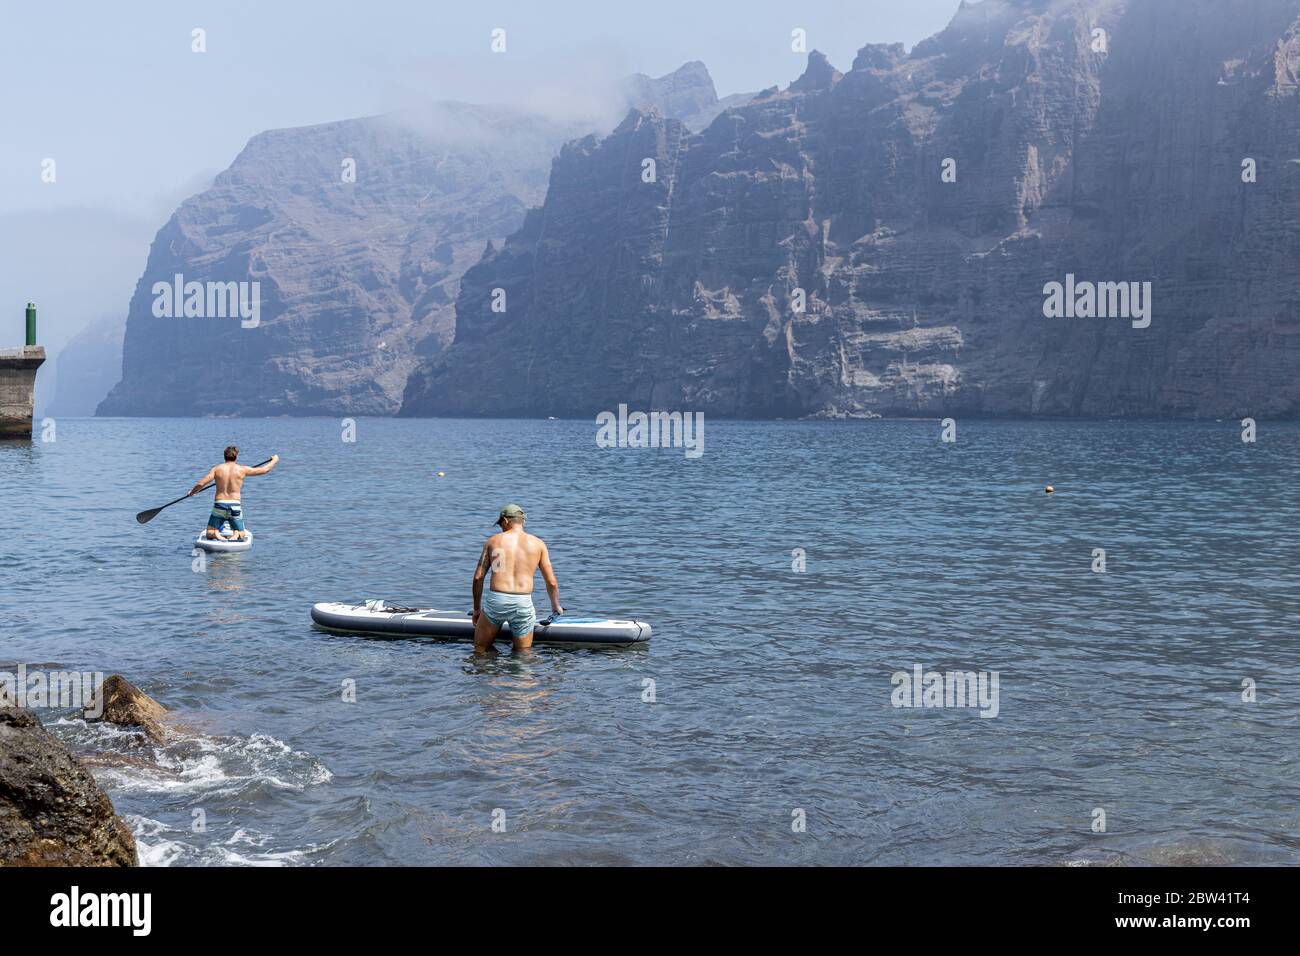 Two young men go out on SUP, stand up paddle boards from the beach during phase two de-escalation of the Covid 19, coronavirus state of emergency.  Pl Stock Photo